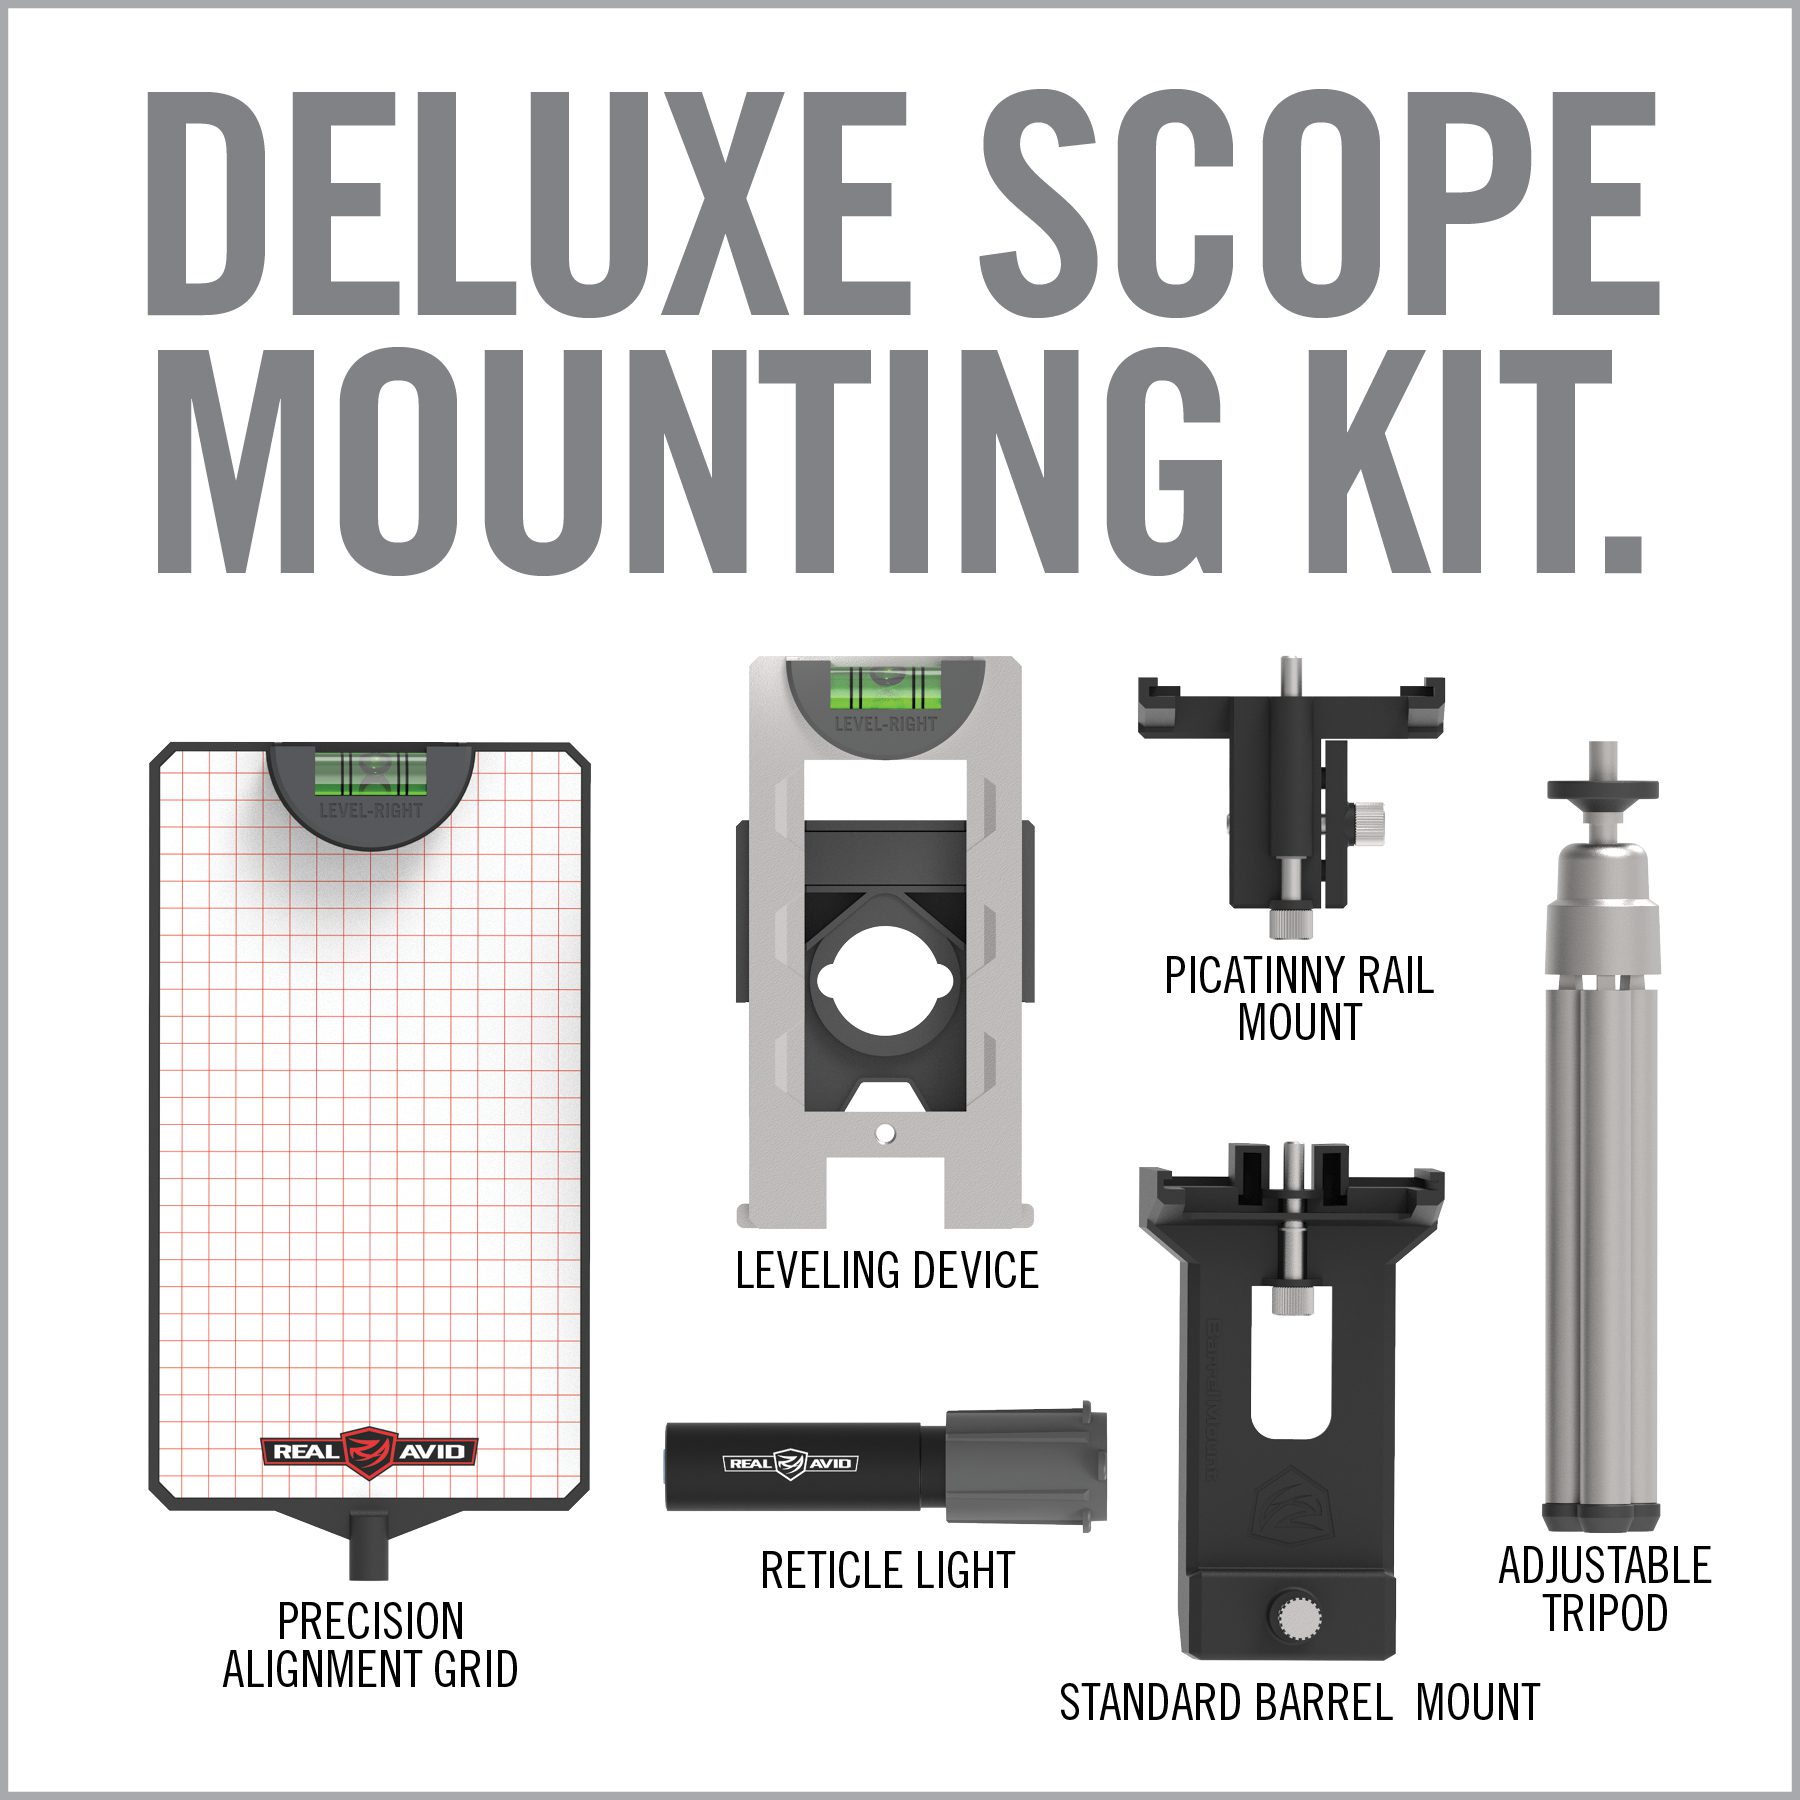 the deluxe scope mounting kit includes mountings, levers, and attachments